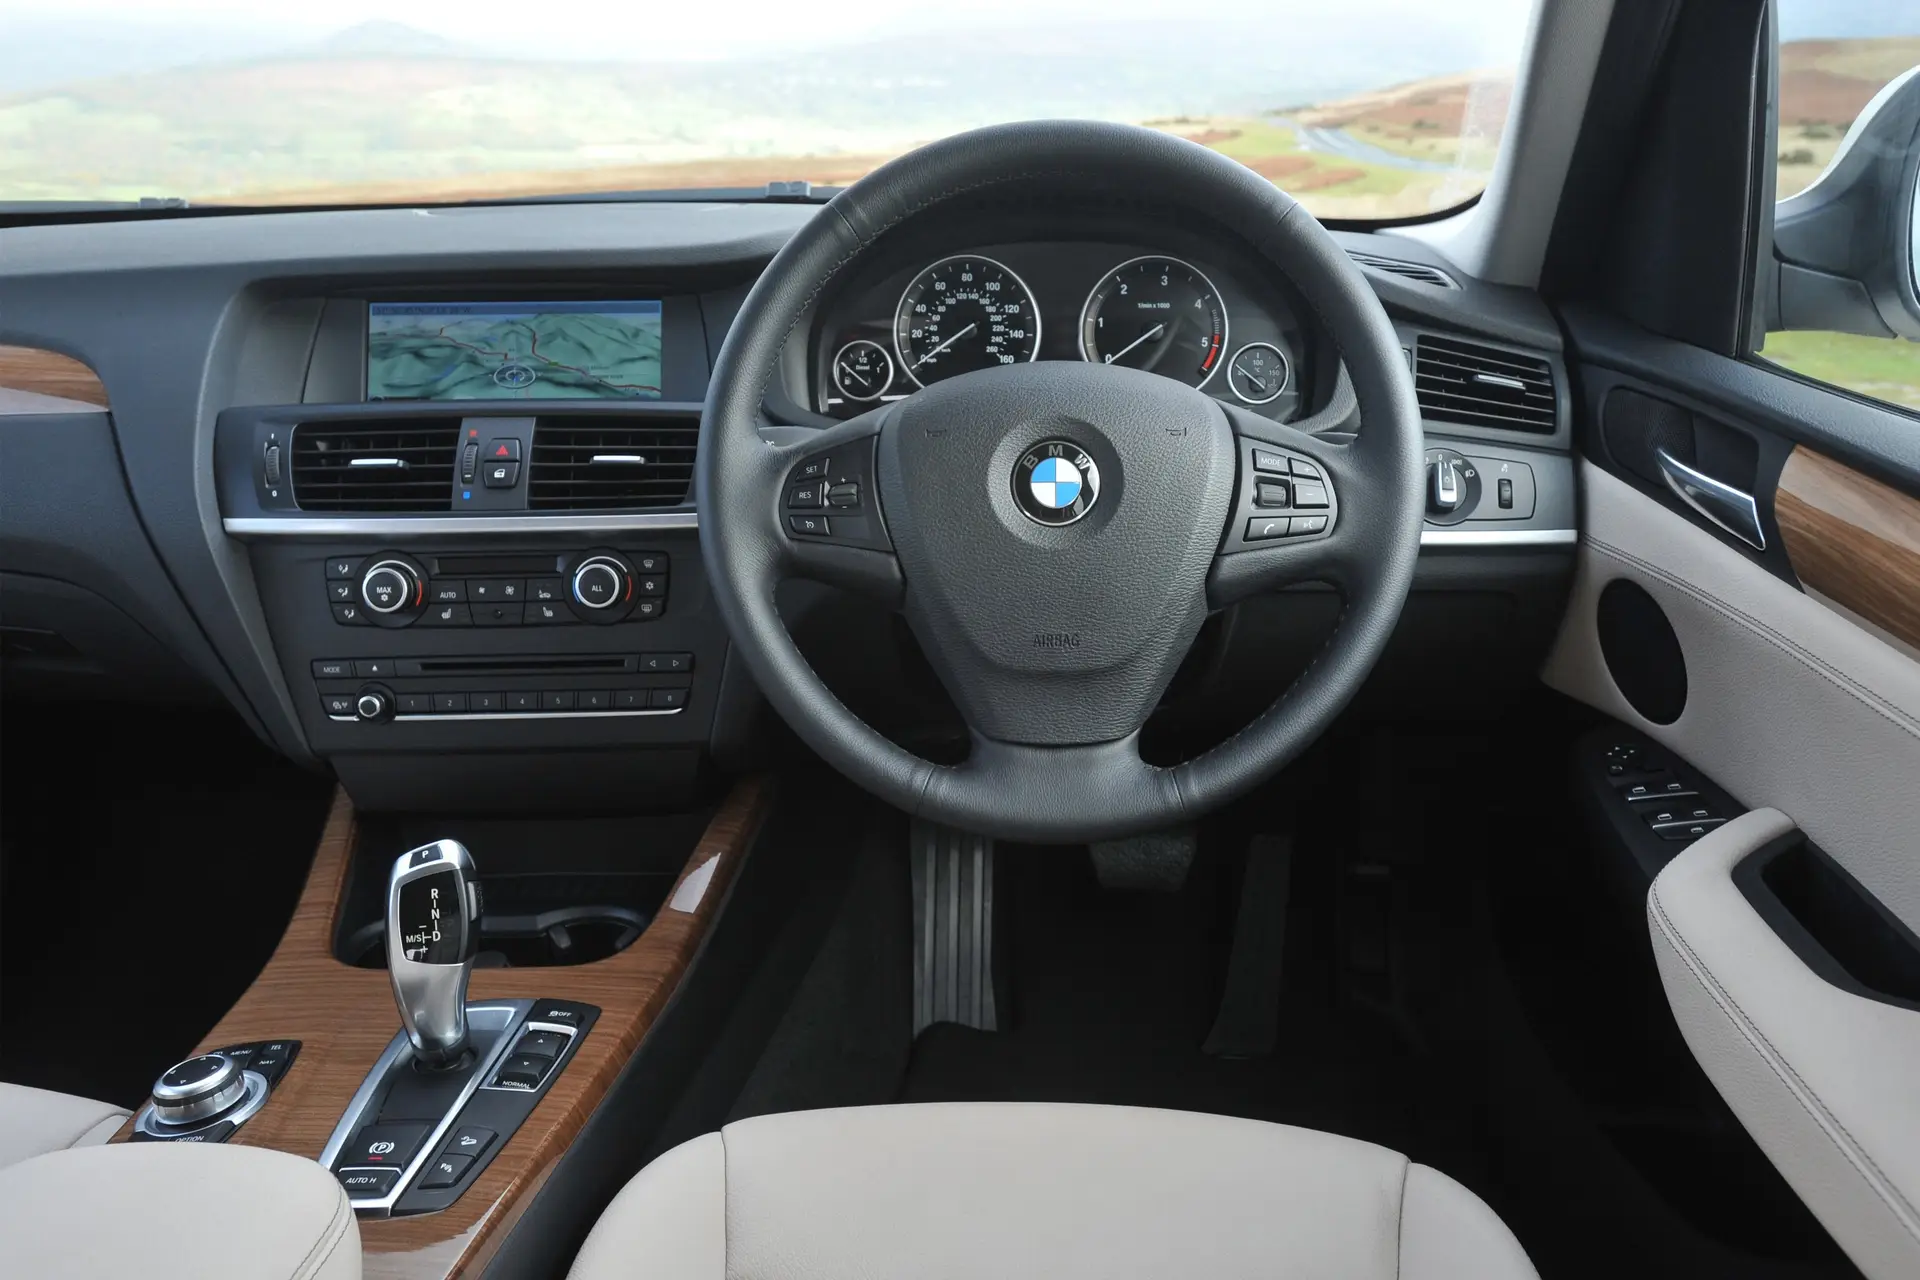 BMW X3 (2010-2018) Review: Interior close up photo of the BMW X3 dashboard